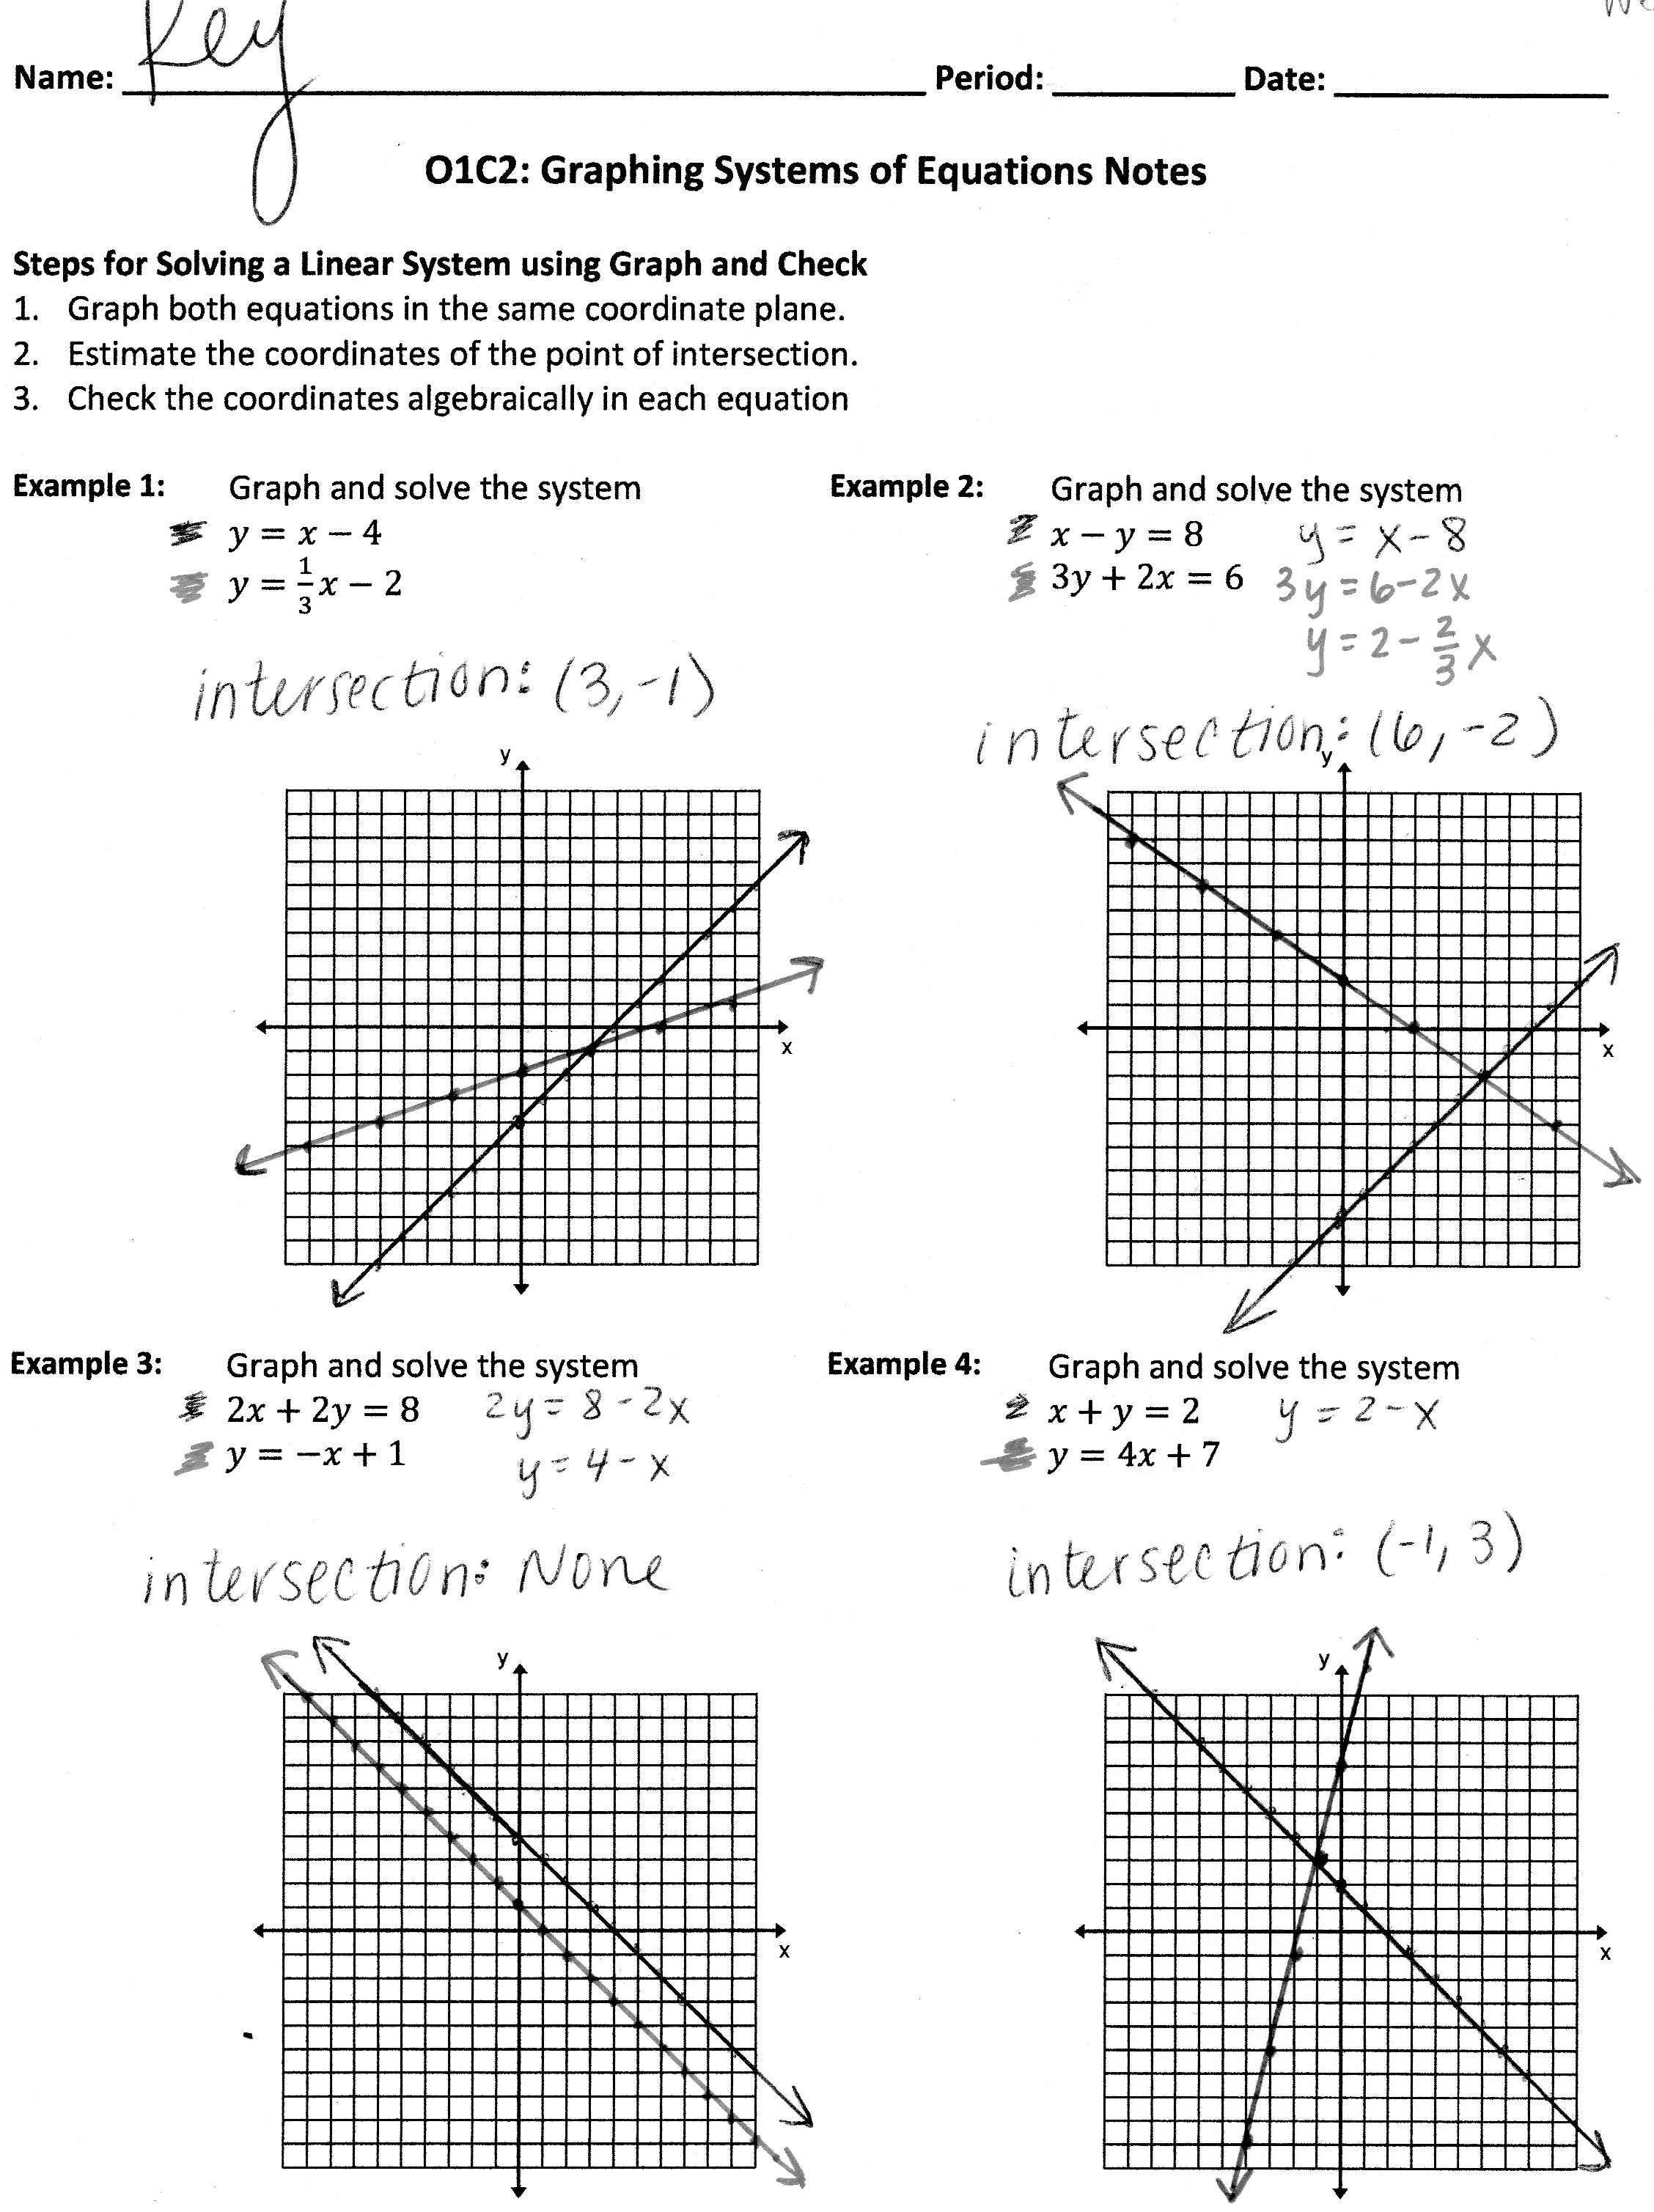 10-best-images-of-graphing-systems-of-equations-worksheet-solving-systems-of-linear-equations